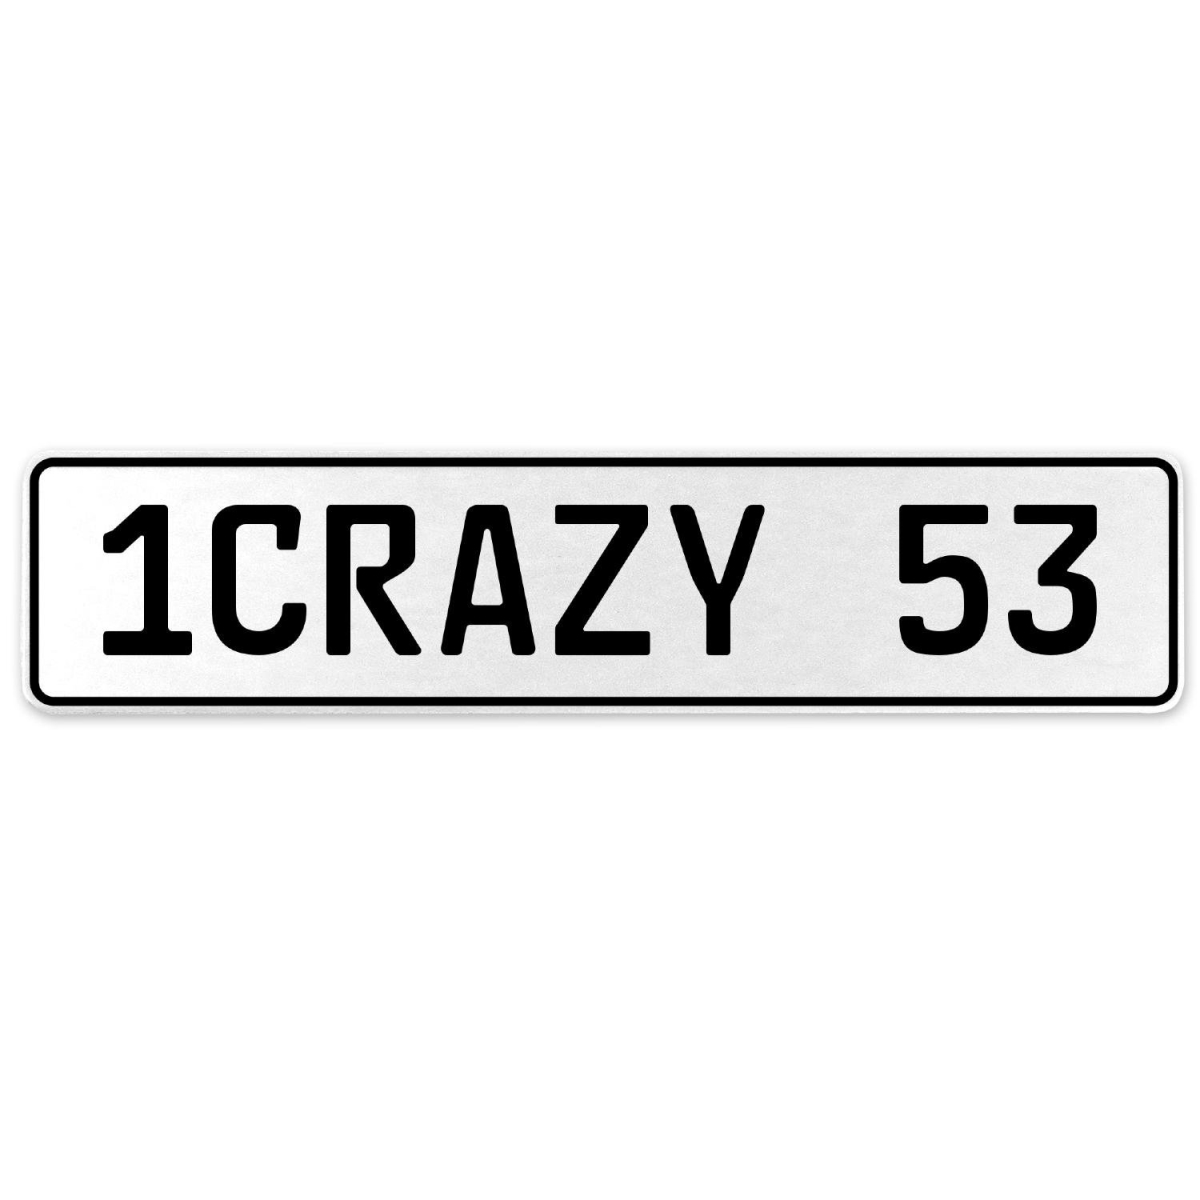 Vintage Parts USA 555739 1Crazy 53 - White Aluminum Street Sign Mancave Euro Plate Name Door Sign Wall